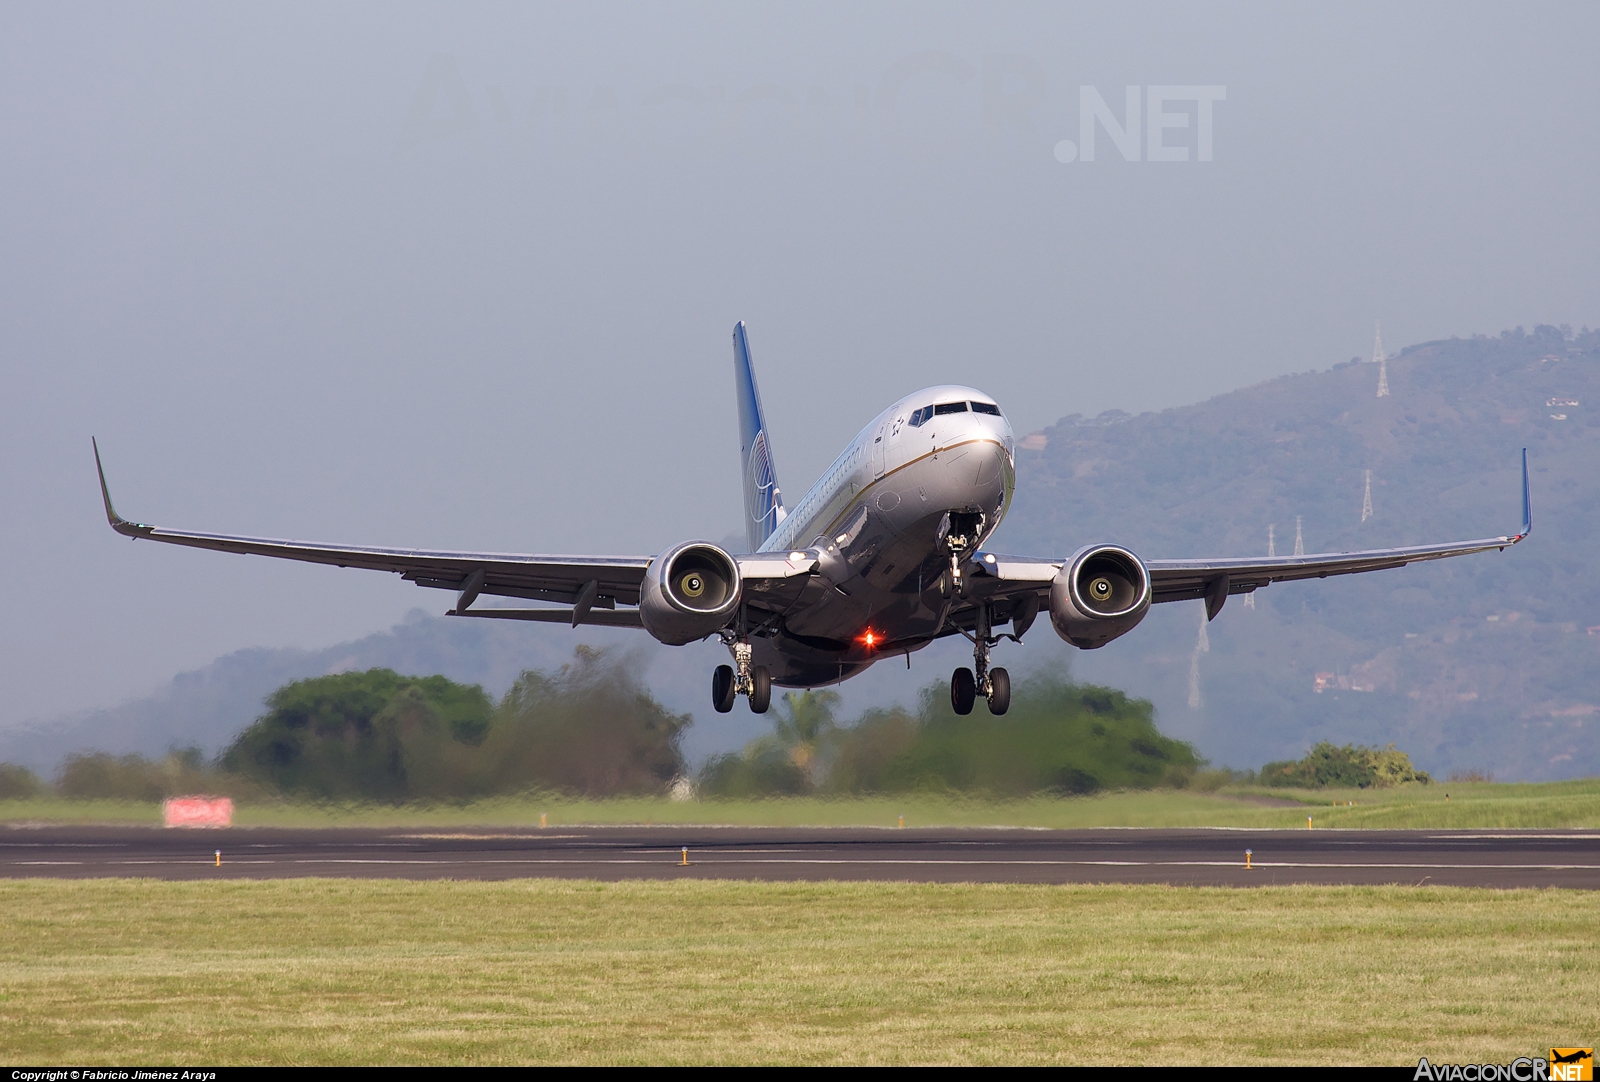 N16713 - Boeing 737-724 - Continental Airlines